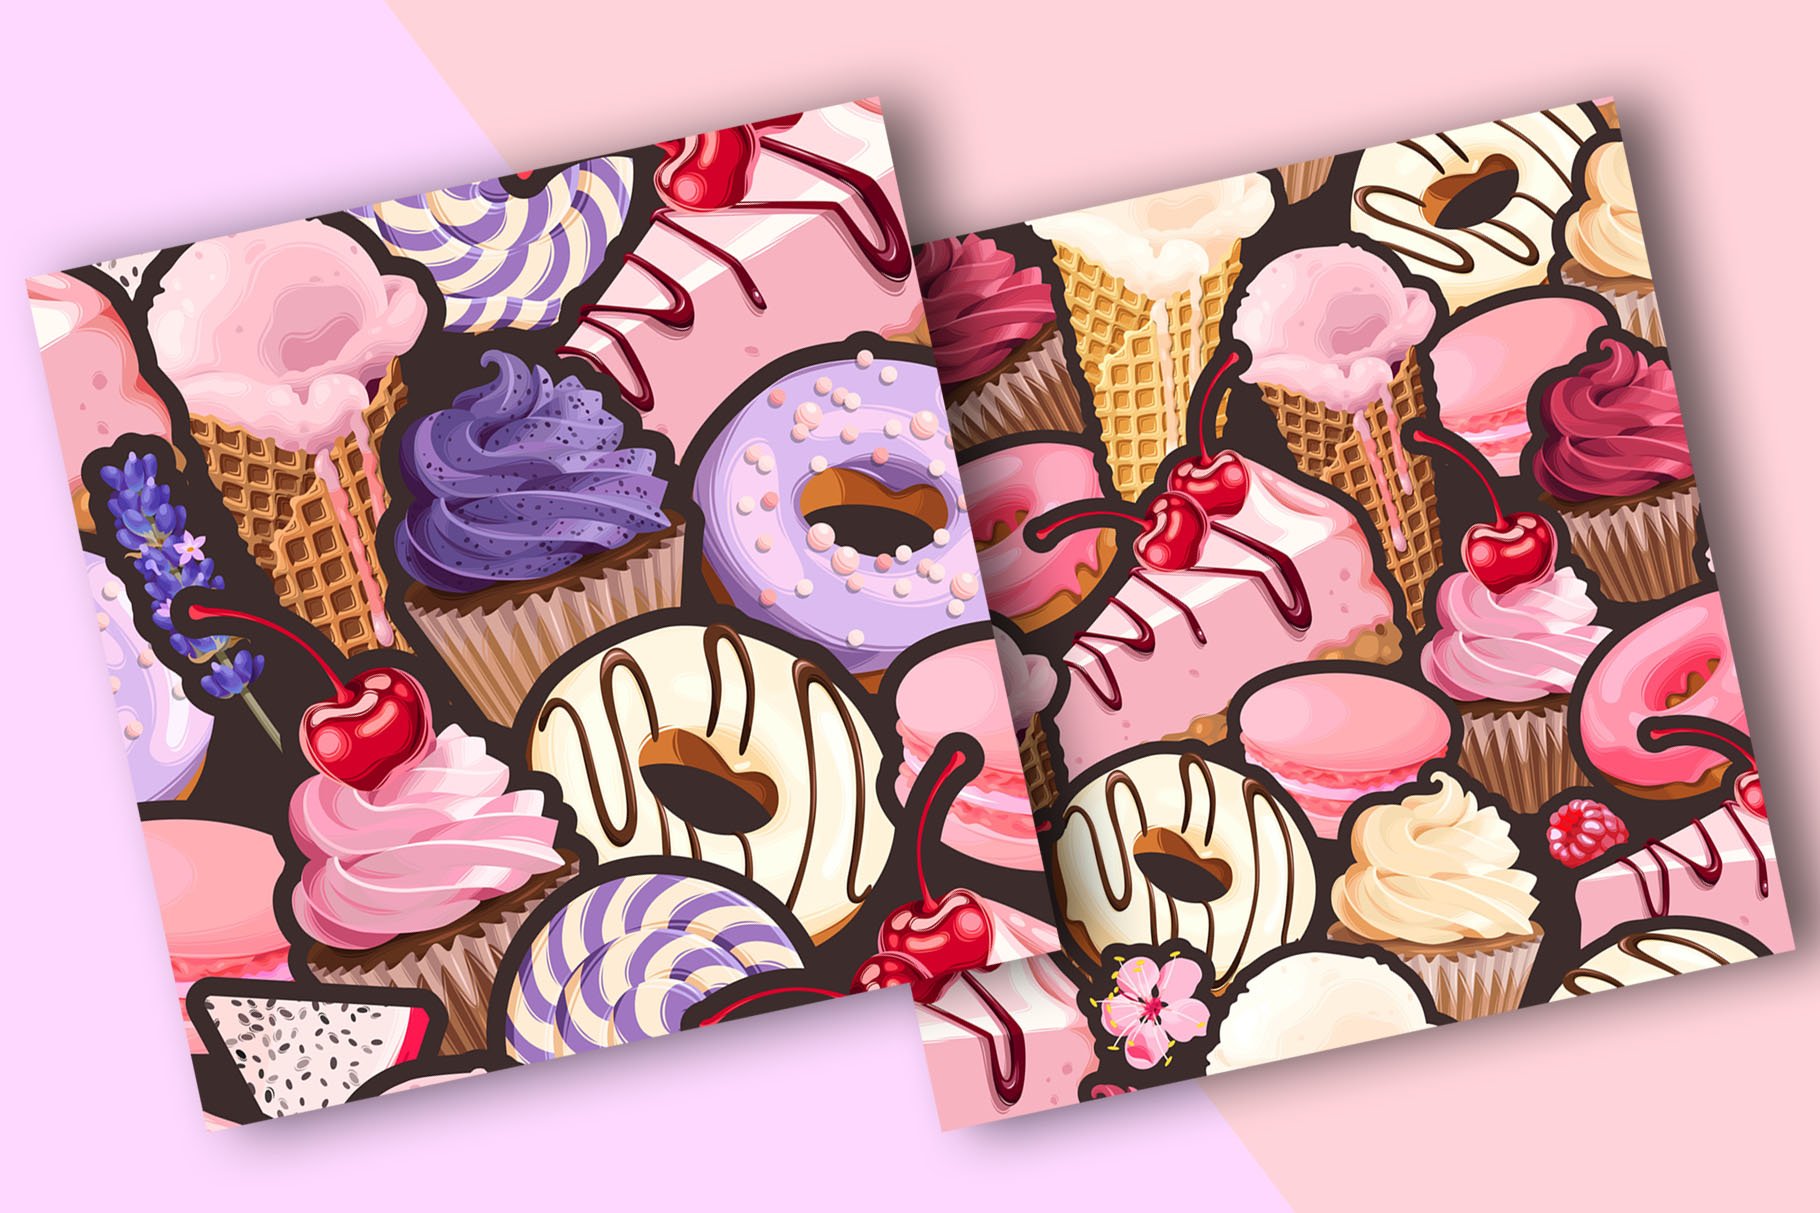 Sweets Patterns preview image.